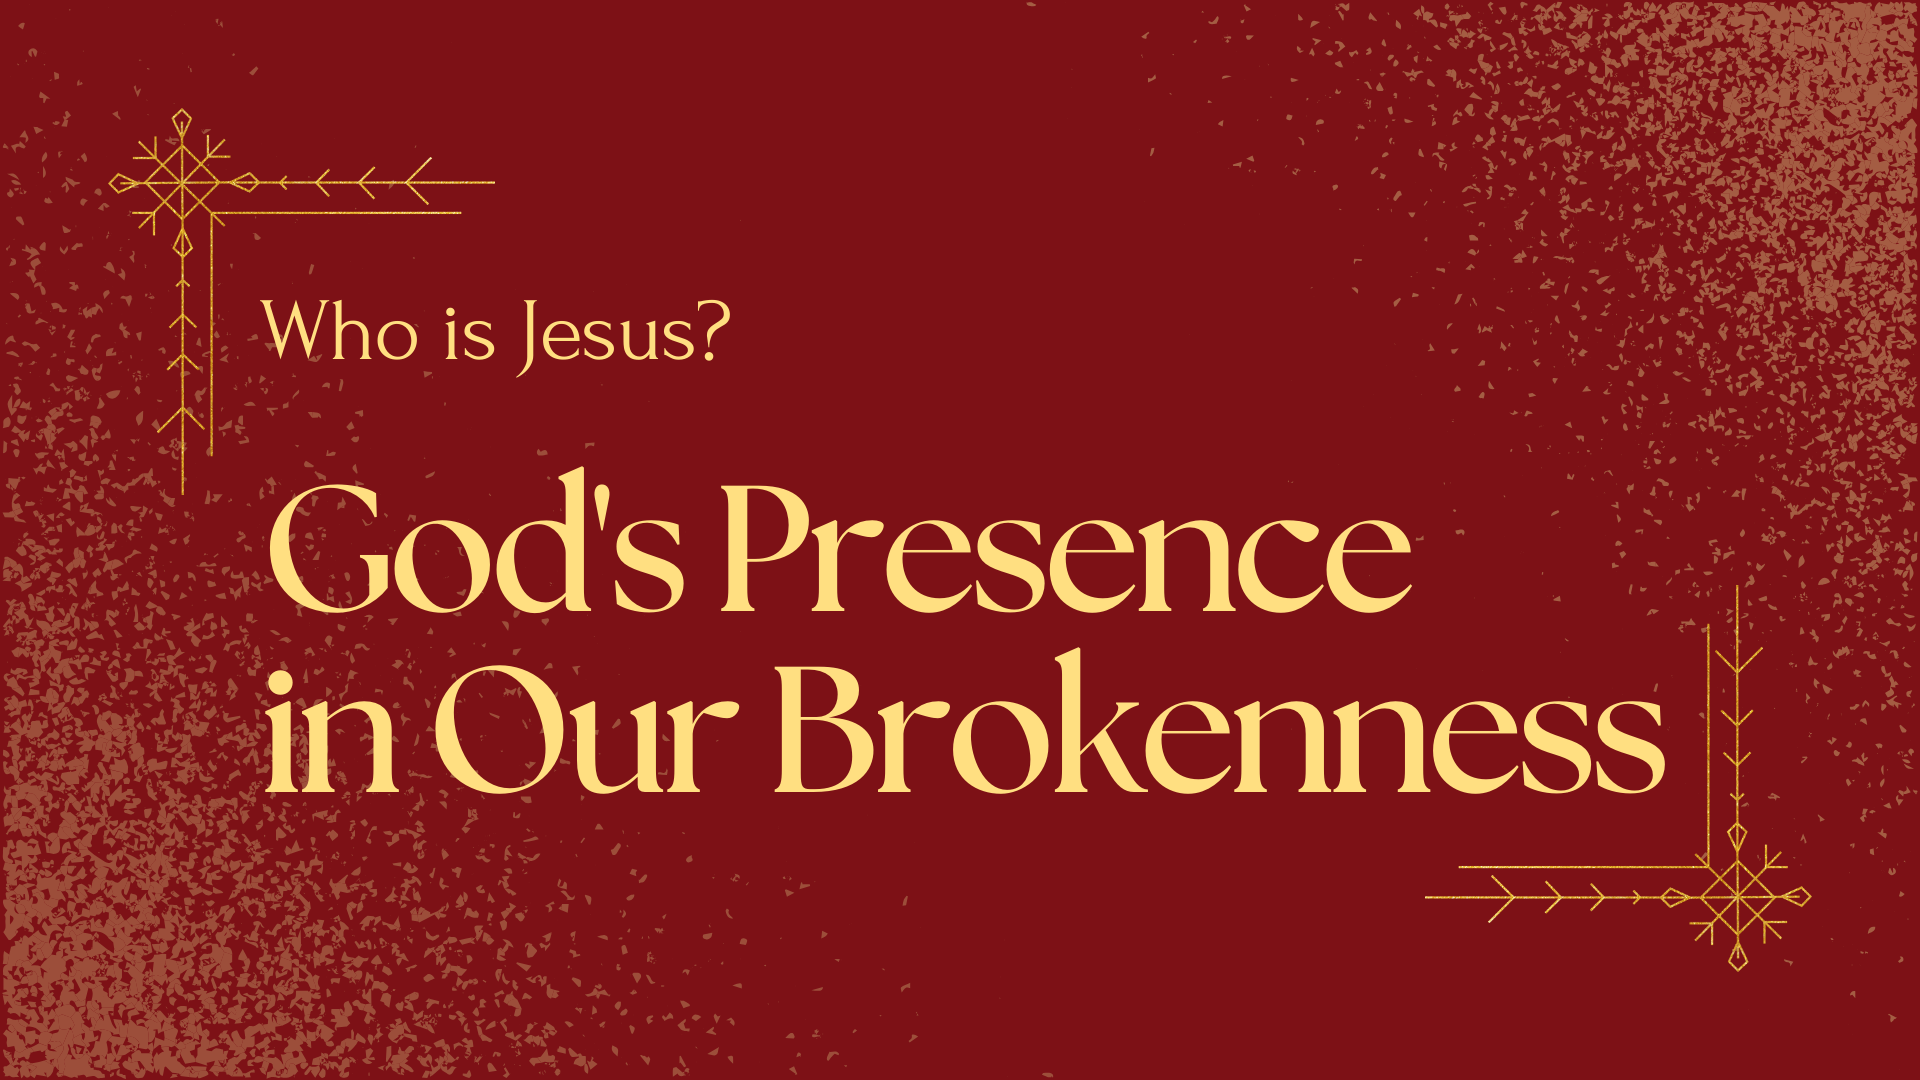 Advent: God's Presence in Our Brokenness